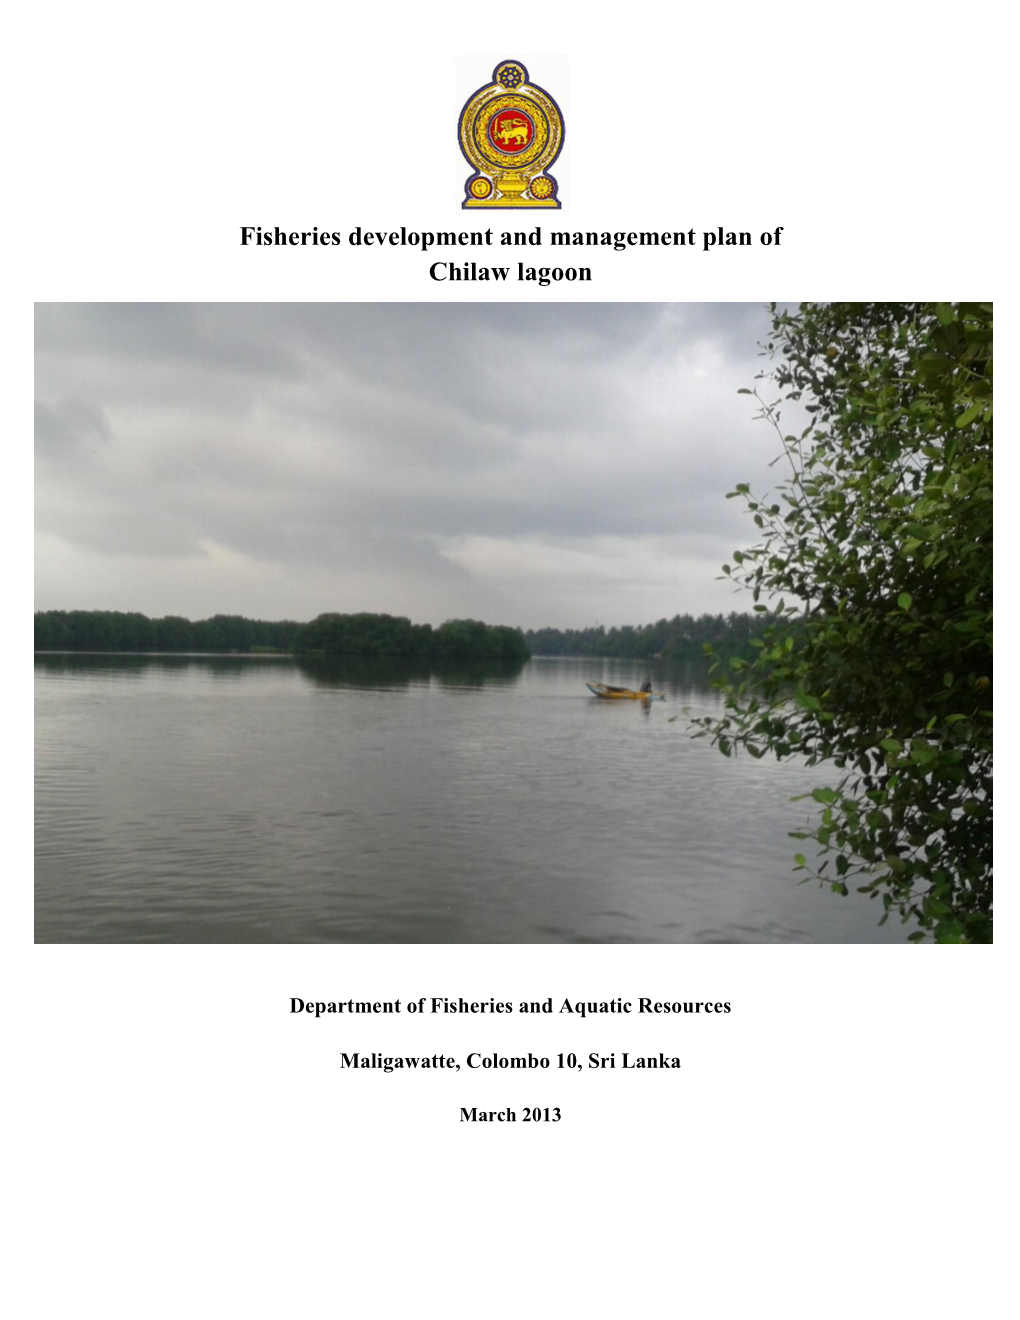 Fisheries Development and Management Plan of Chilaw Lagoon